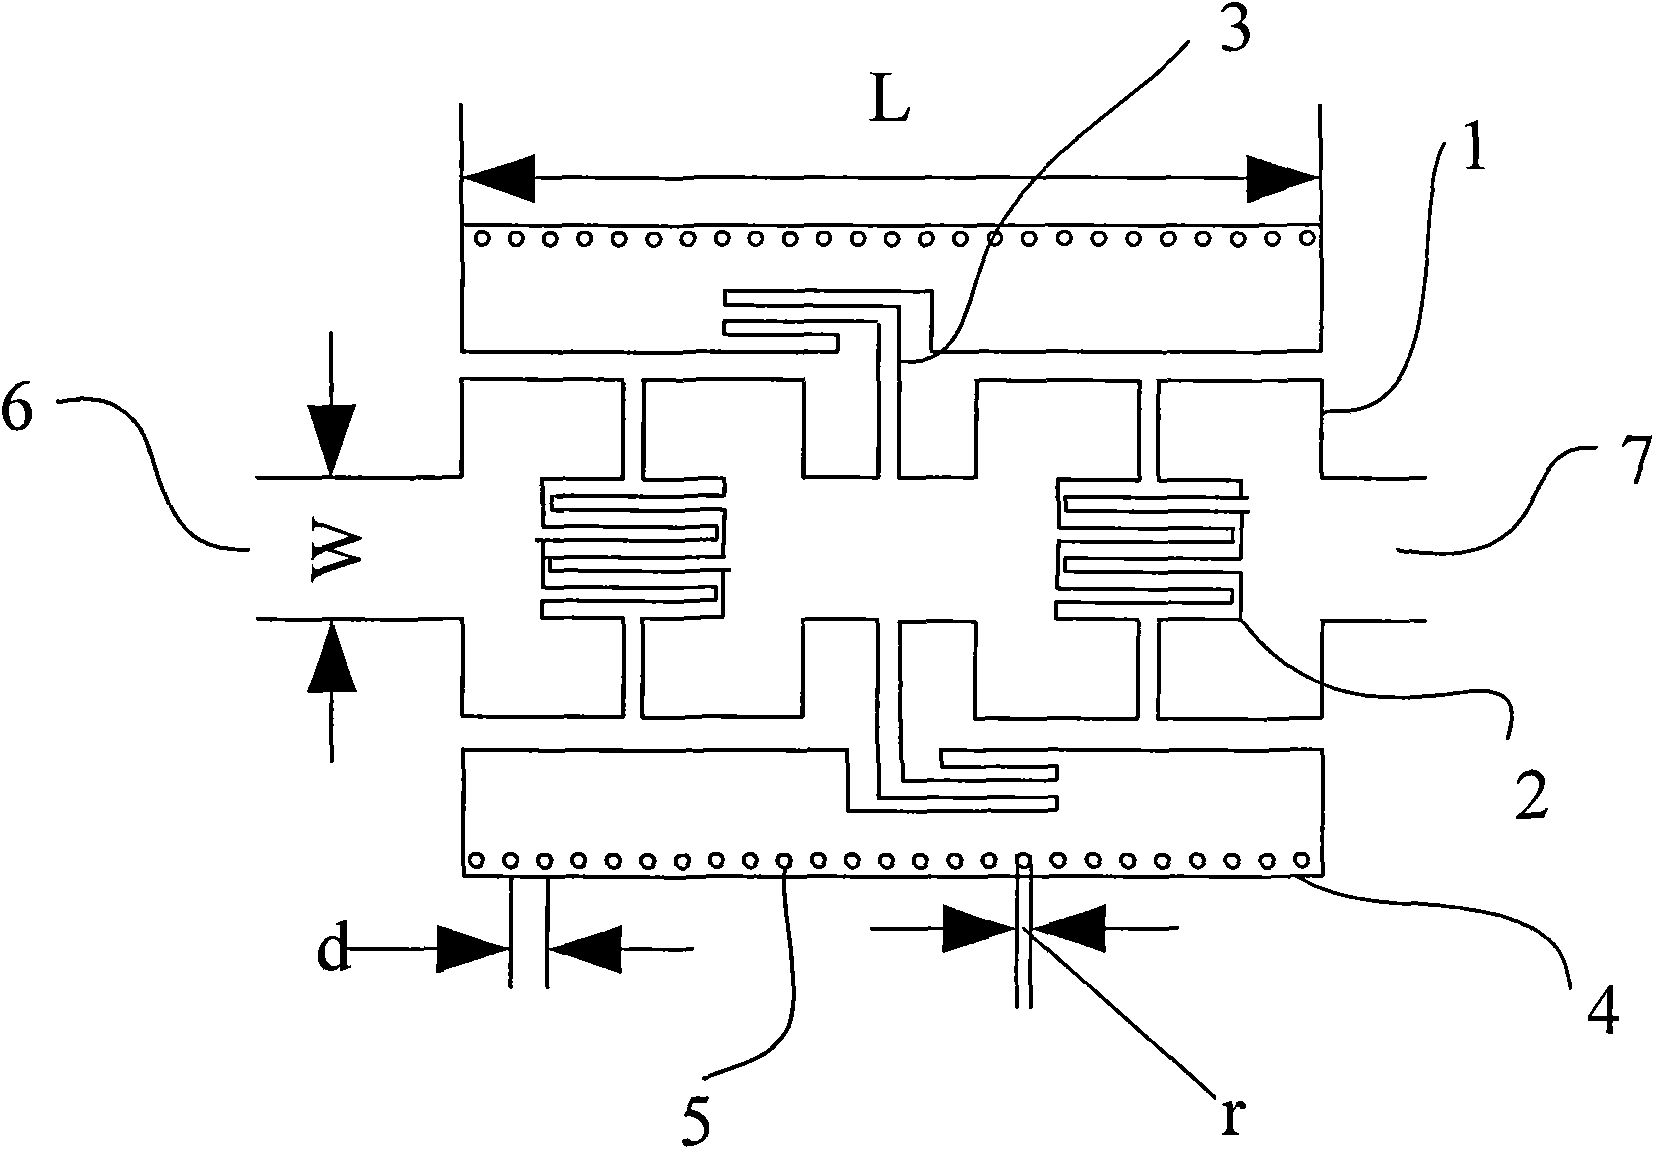 Micro-strip resonator based on substrate integration waveguide